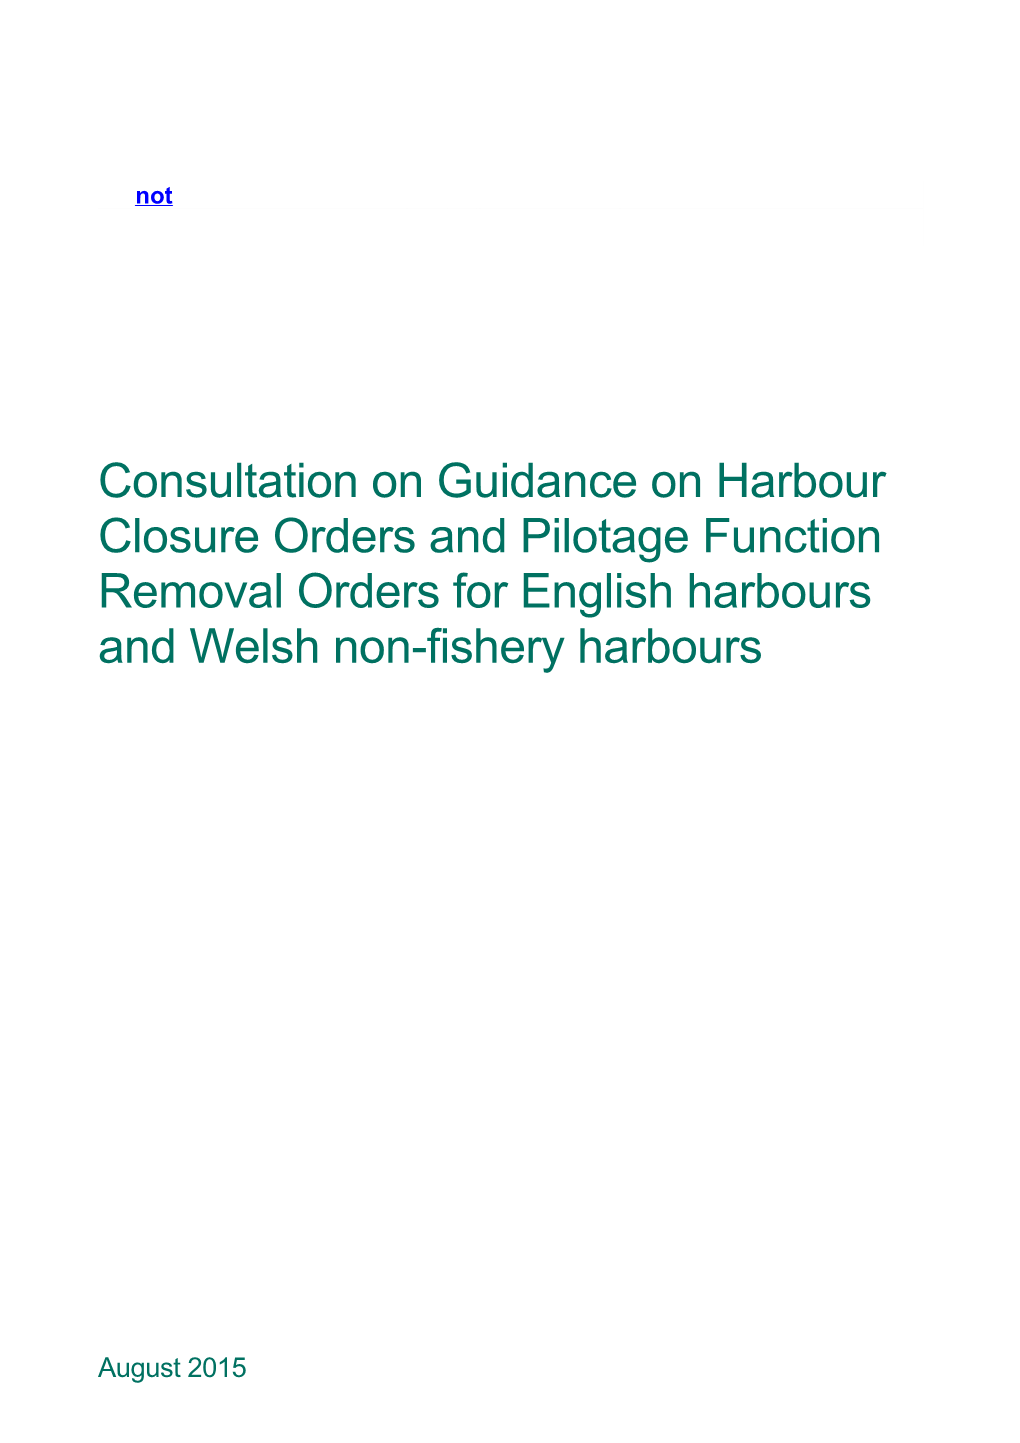 Consultation on Guidance on Harbour Closure Orders and Pilotage Function Removal Orders